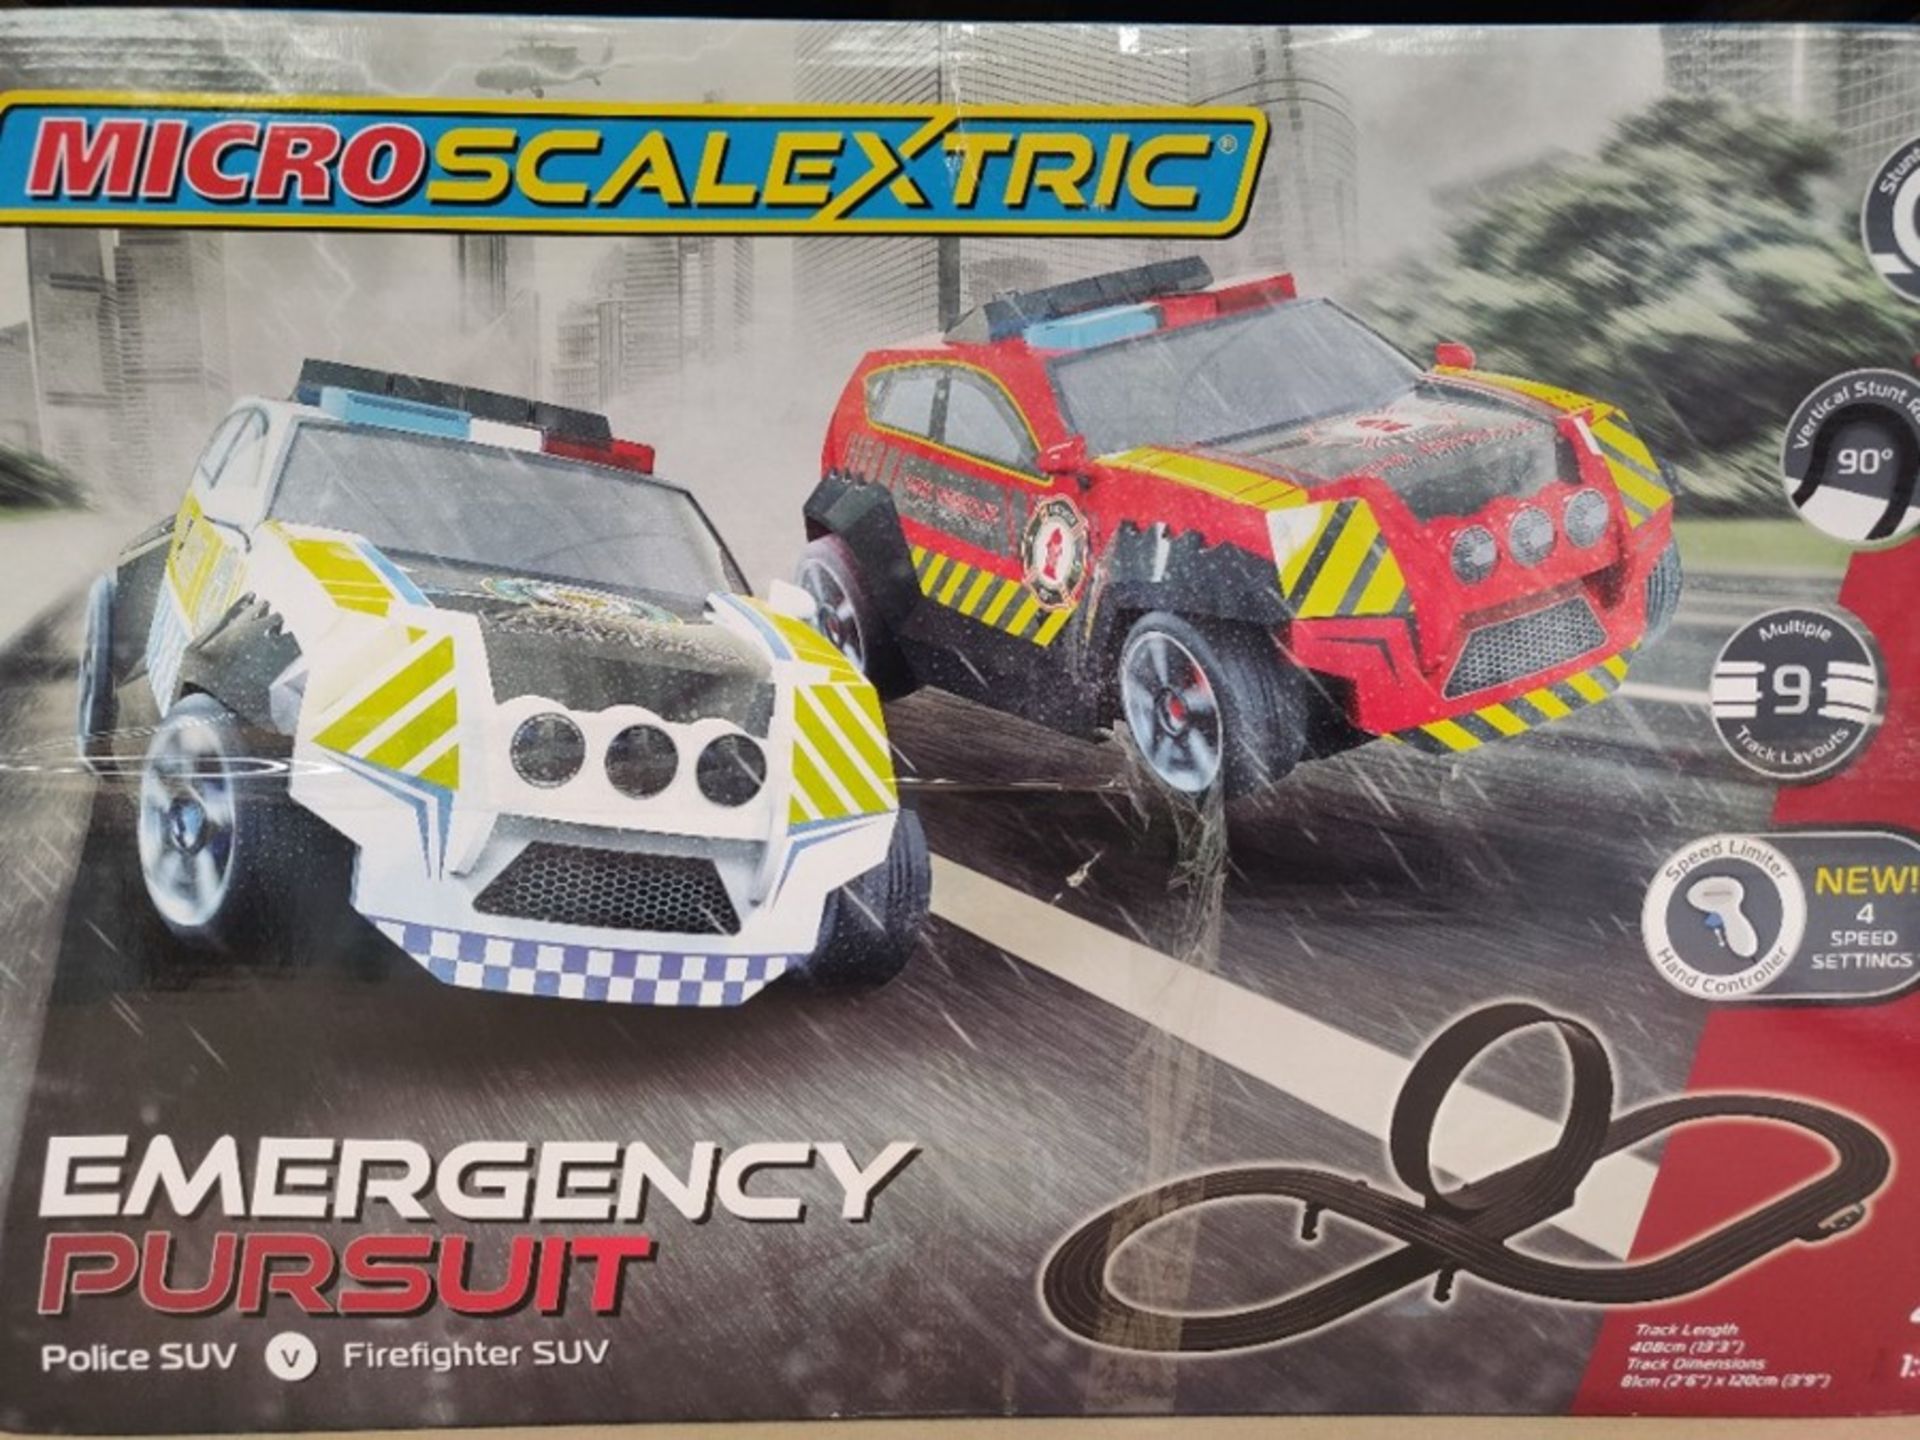 Micro Scalextric G1132 Emergency Pursuit Slot Car Racing, Black - Image 2 of 3